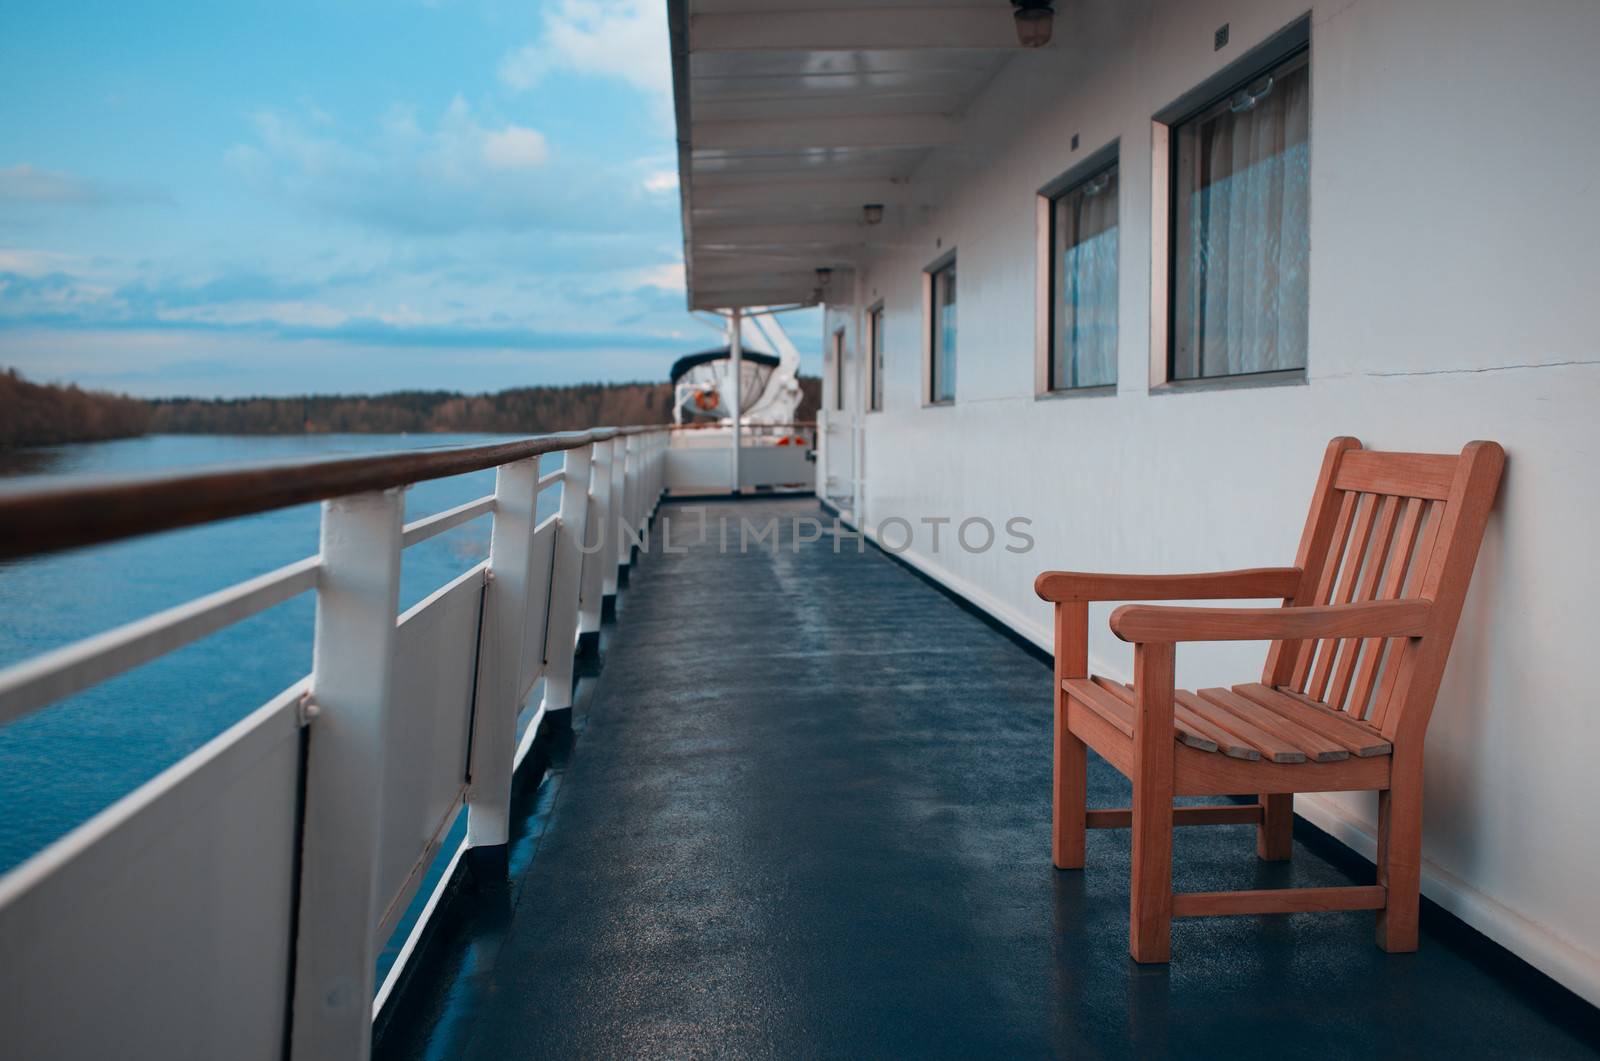 Wooden chair on the deck of cruise liner by danr13